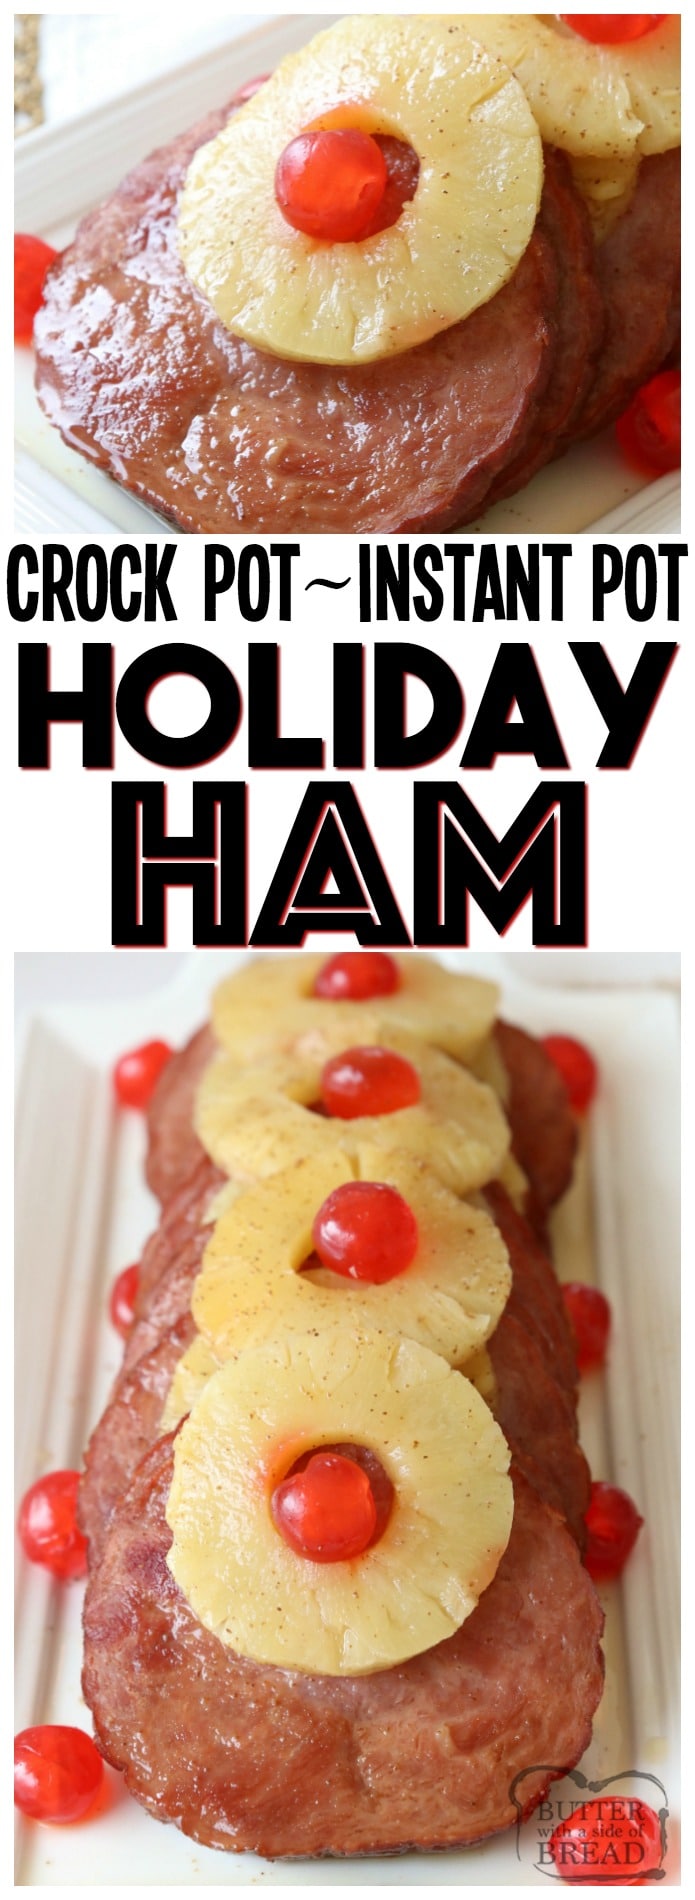 Crock Pot Ham is my favorite holiday ham recipe! Just 4 ingredients and can be made in the crockpot or Instant Pot. Brown sugar and pineapple provide a sweet, tangy flavor to the ham. Quick & easy ham recipe that takes just minutes to prepare and yields tender, flavorful and juicy ham. Best Ham Recipe ever! Crock Pot Ham or Instant Pot Ham from Butter With A Side of Bread #crockpot #slowcooker #ham #InstantPot #holiday #recipe #food